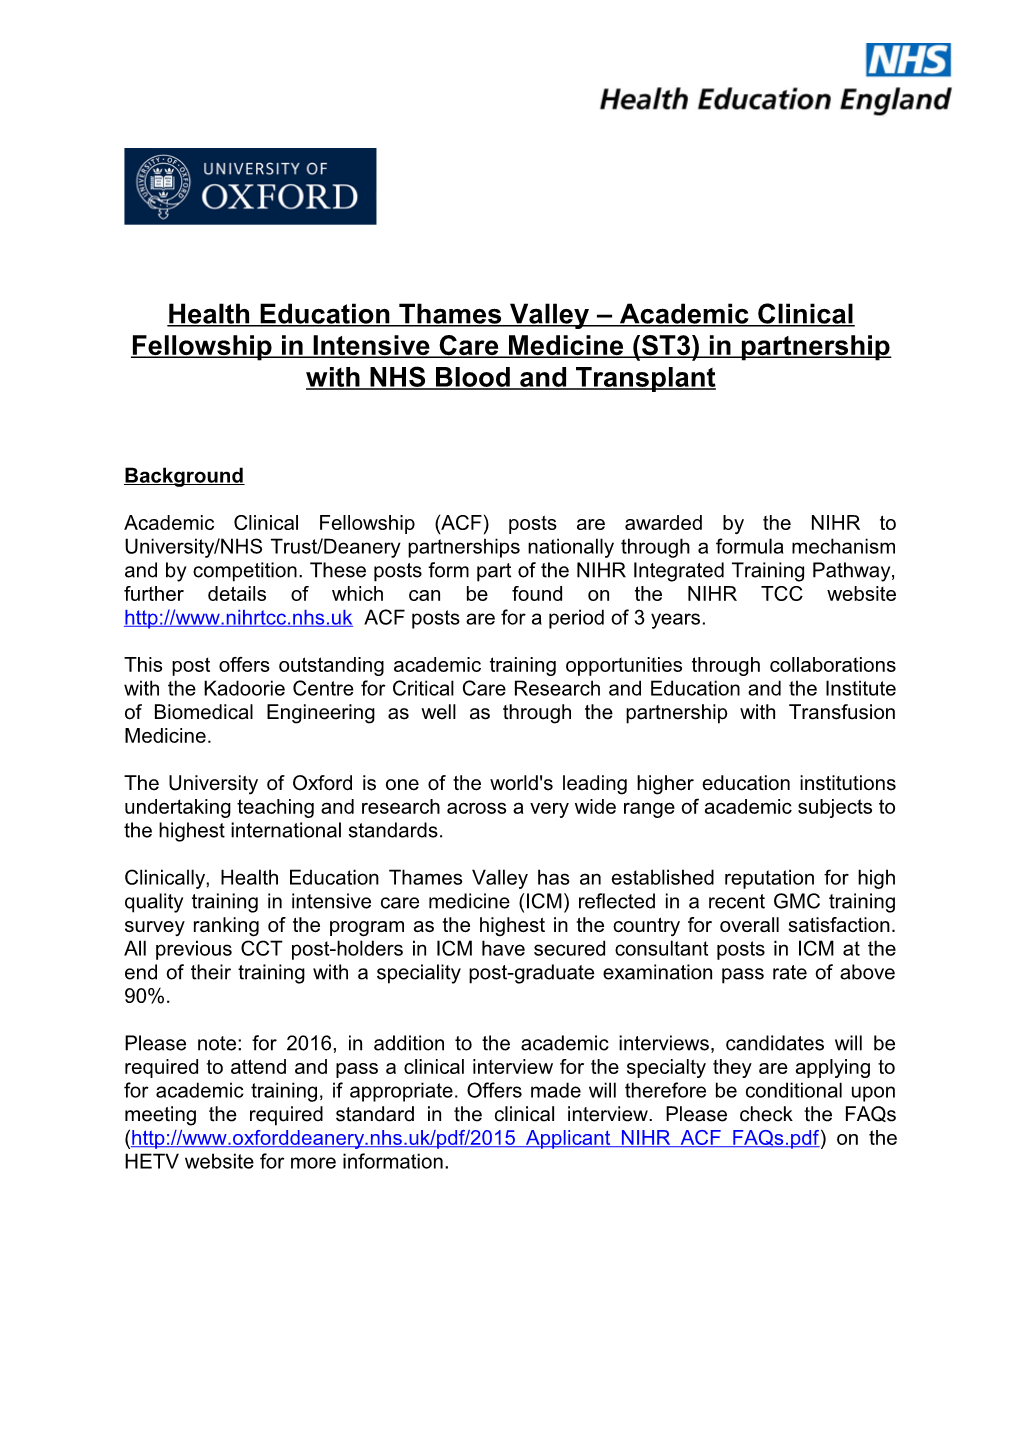 Health Education Thames Valley Academic Clinical Fellowship in Intensive Care Medicine